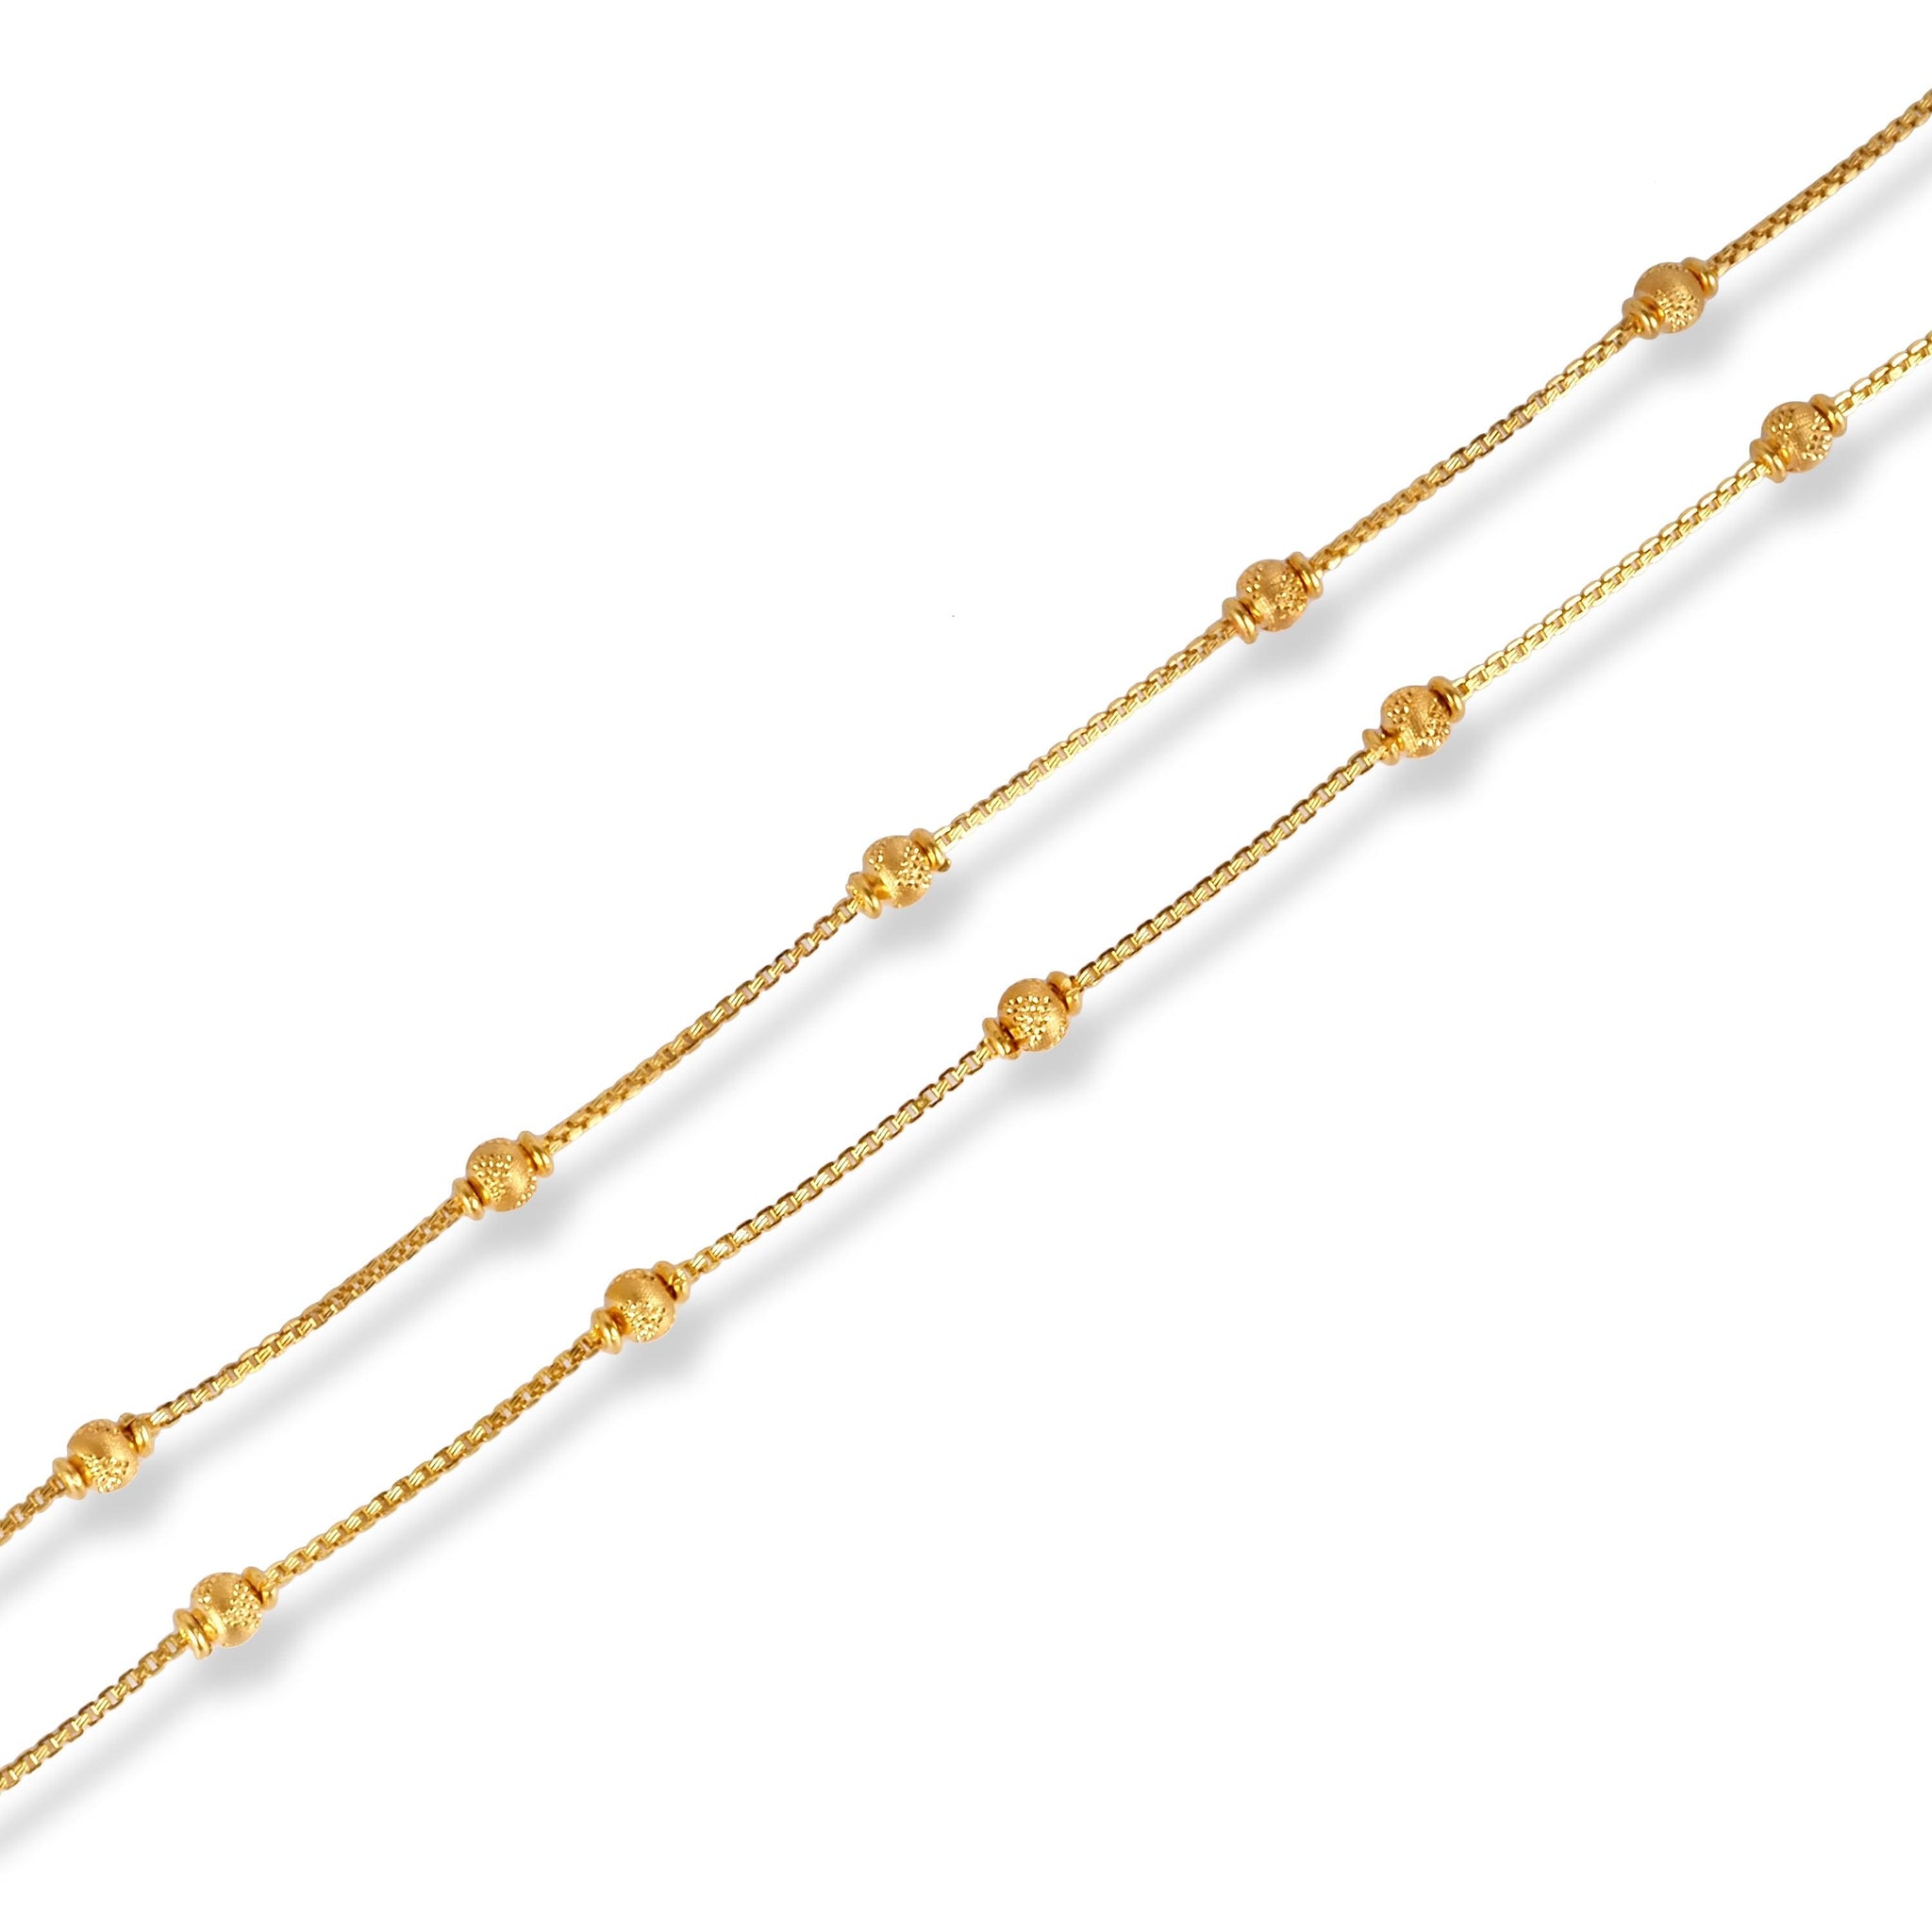 Pair of 22ct Gold Anklet in Diamond Cutting Beads with Ghughri Charm with '' S '' Clasp A-8268